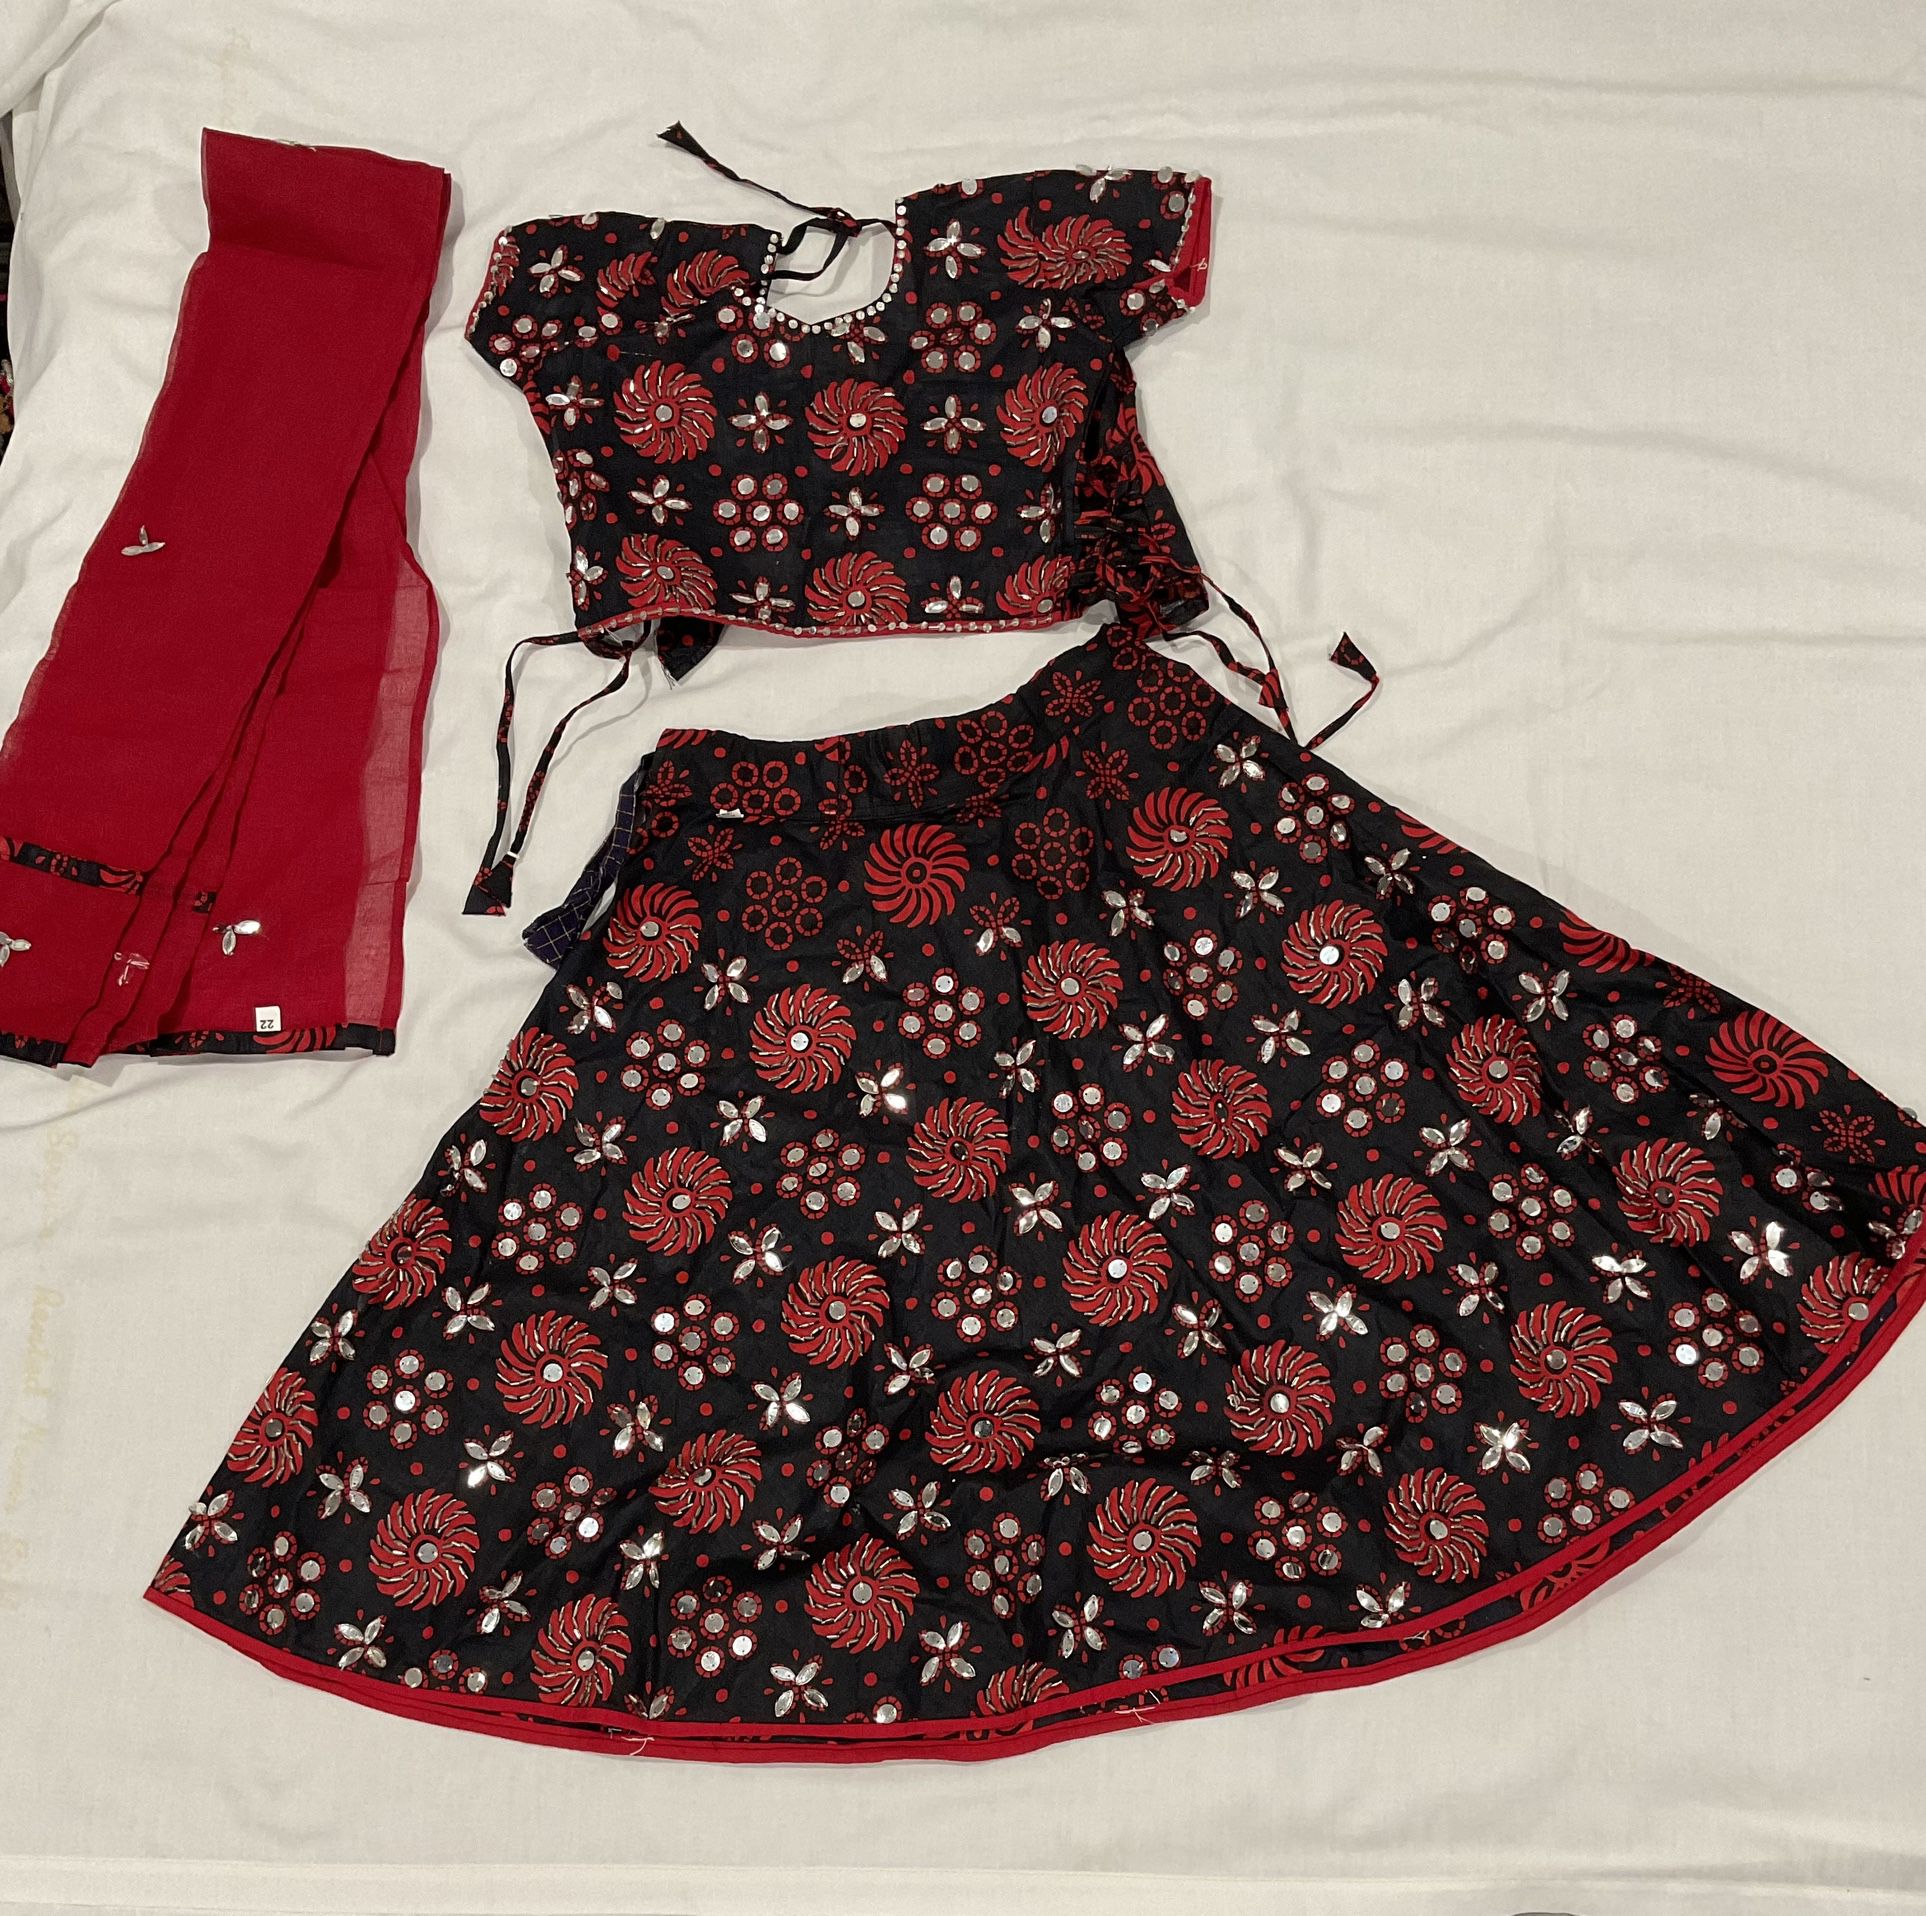 Chania Choli 3 piece set Black and Red With Shiny Silver Embellishment For Child 